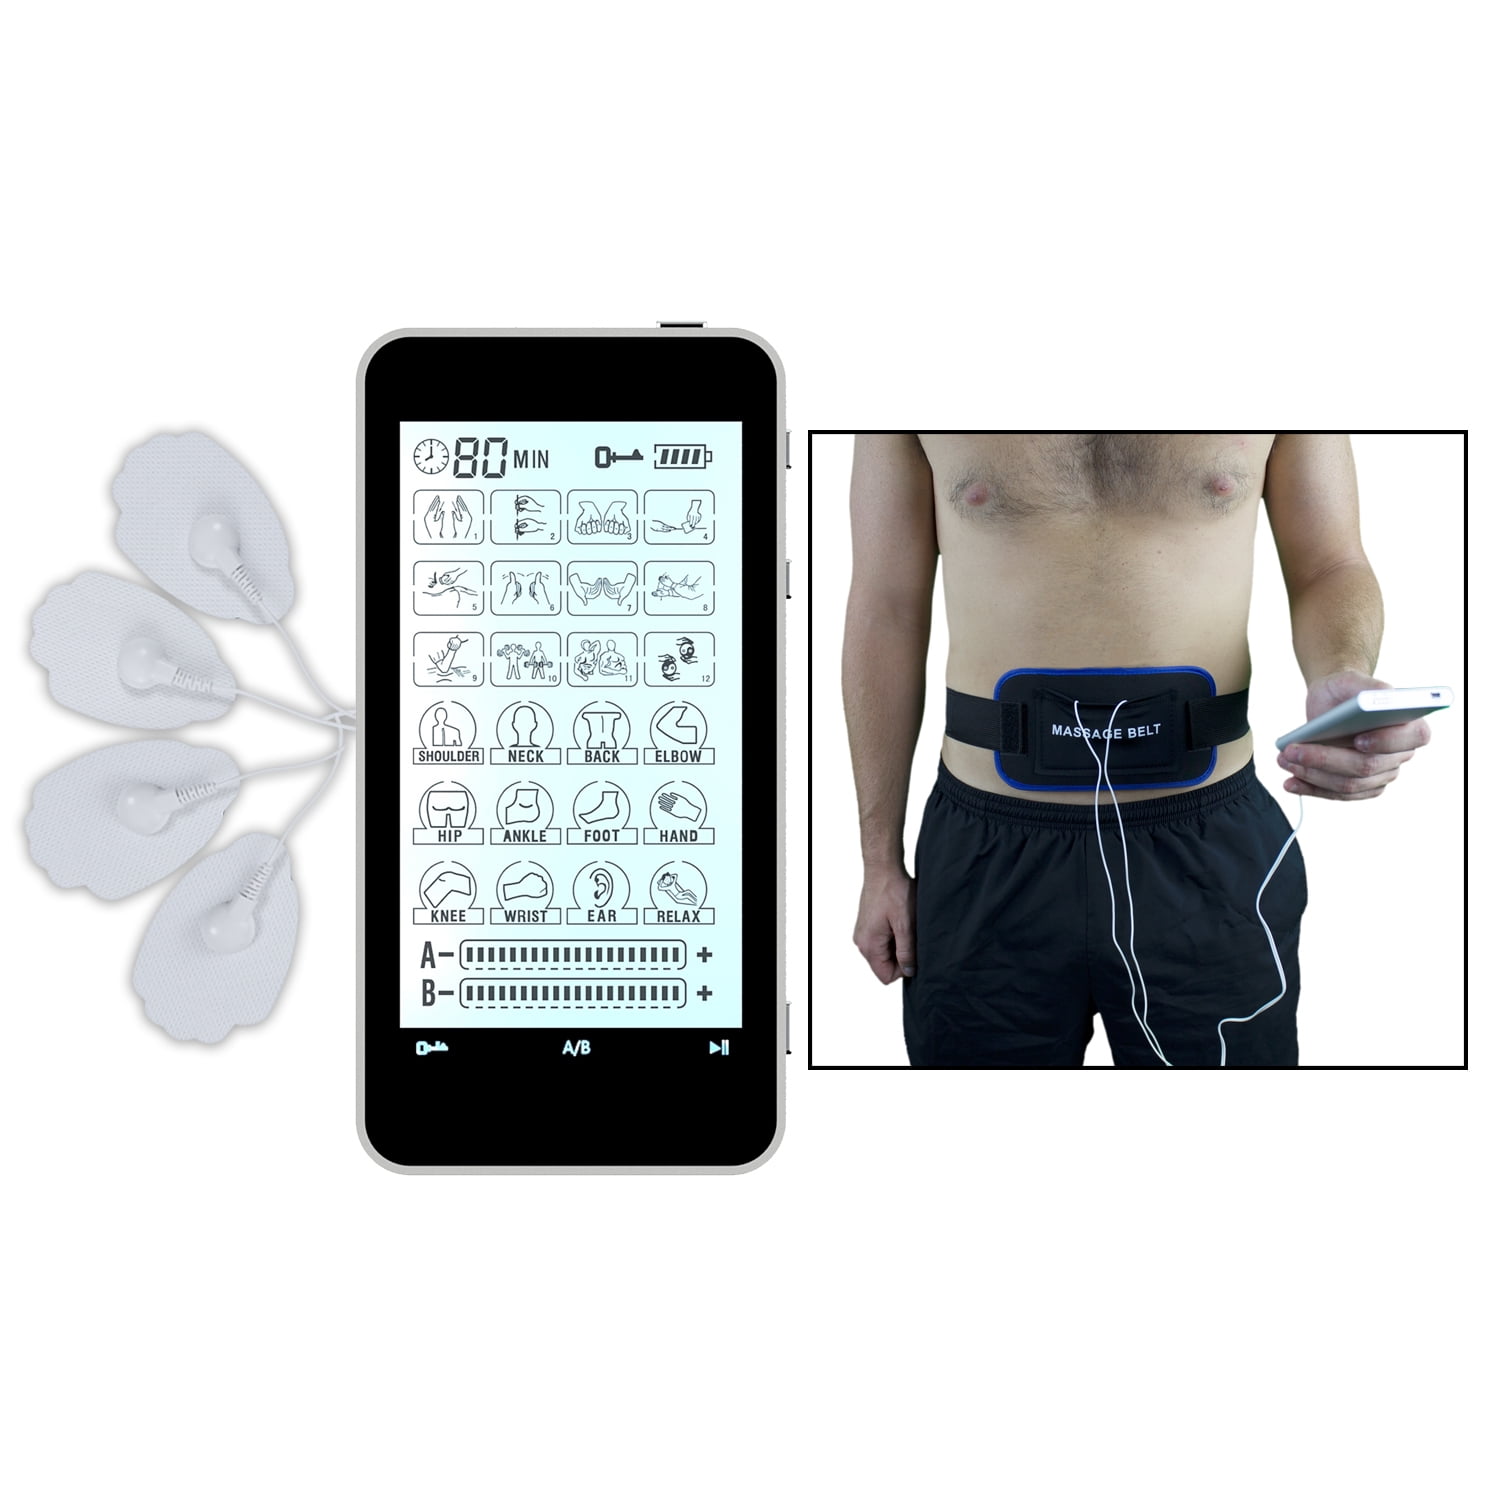 Touch Screen T24AB HealthmateForever Tens Unit & Muscle Stimulator